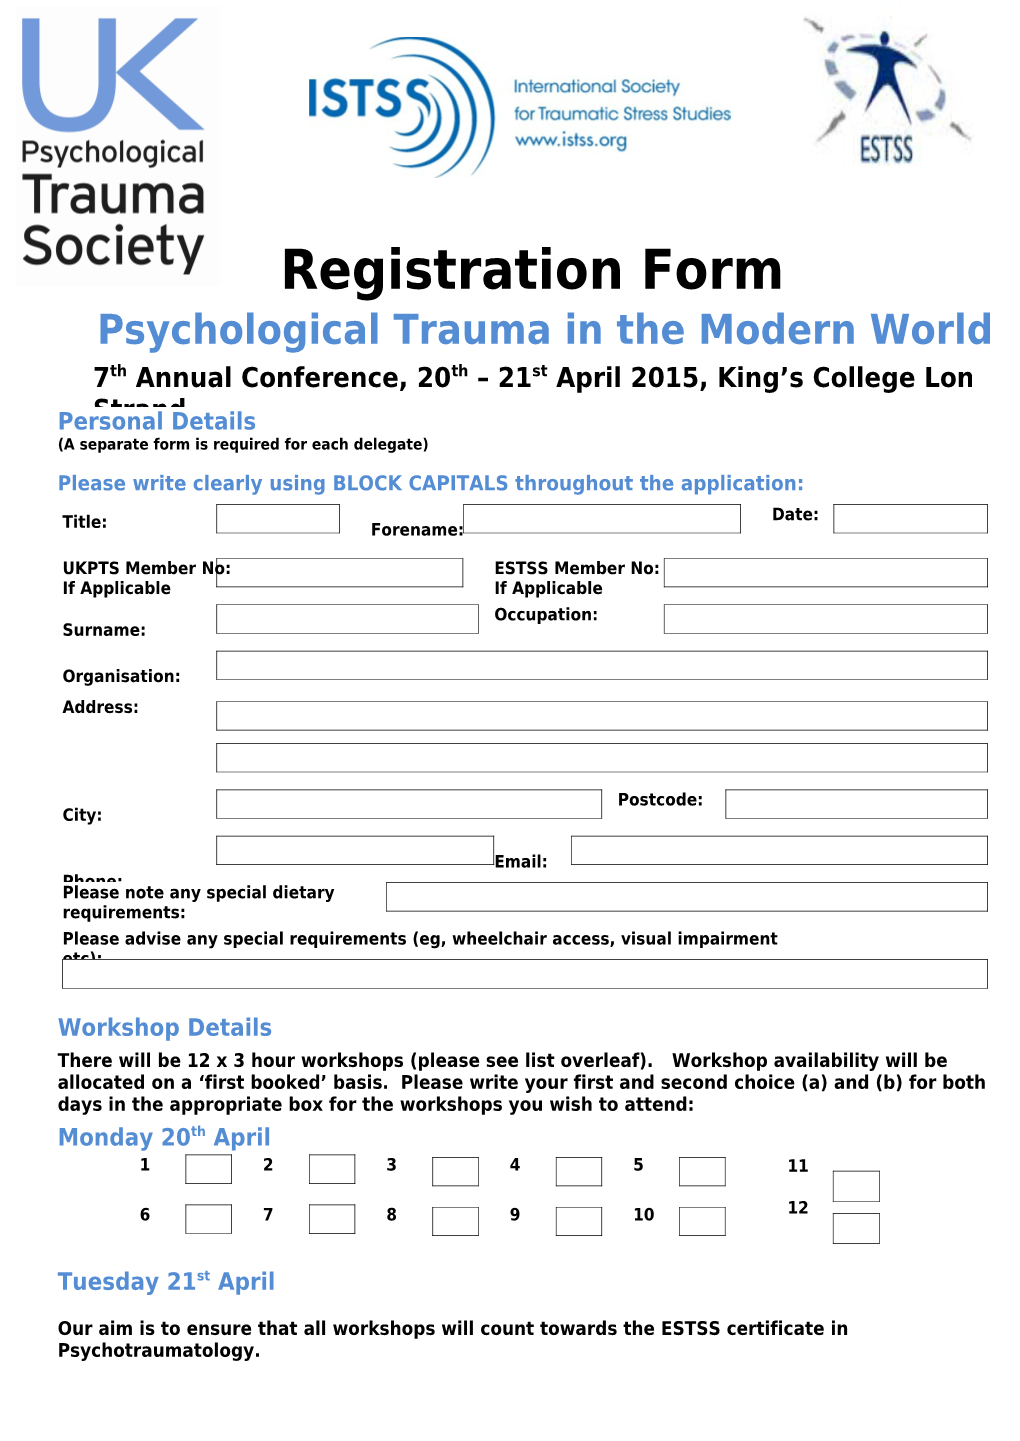 A Separate Form Is Required for Each Delegate